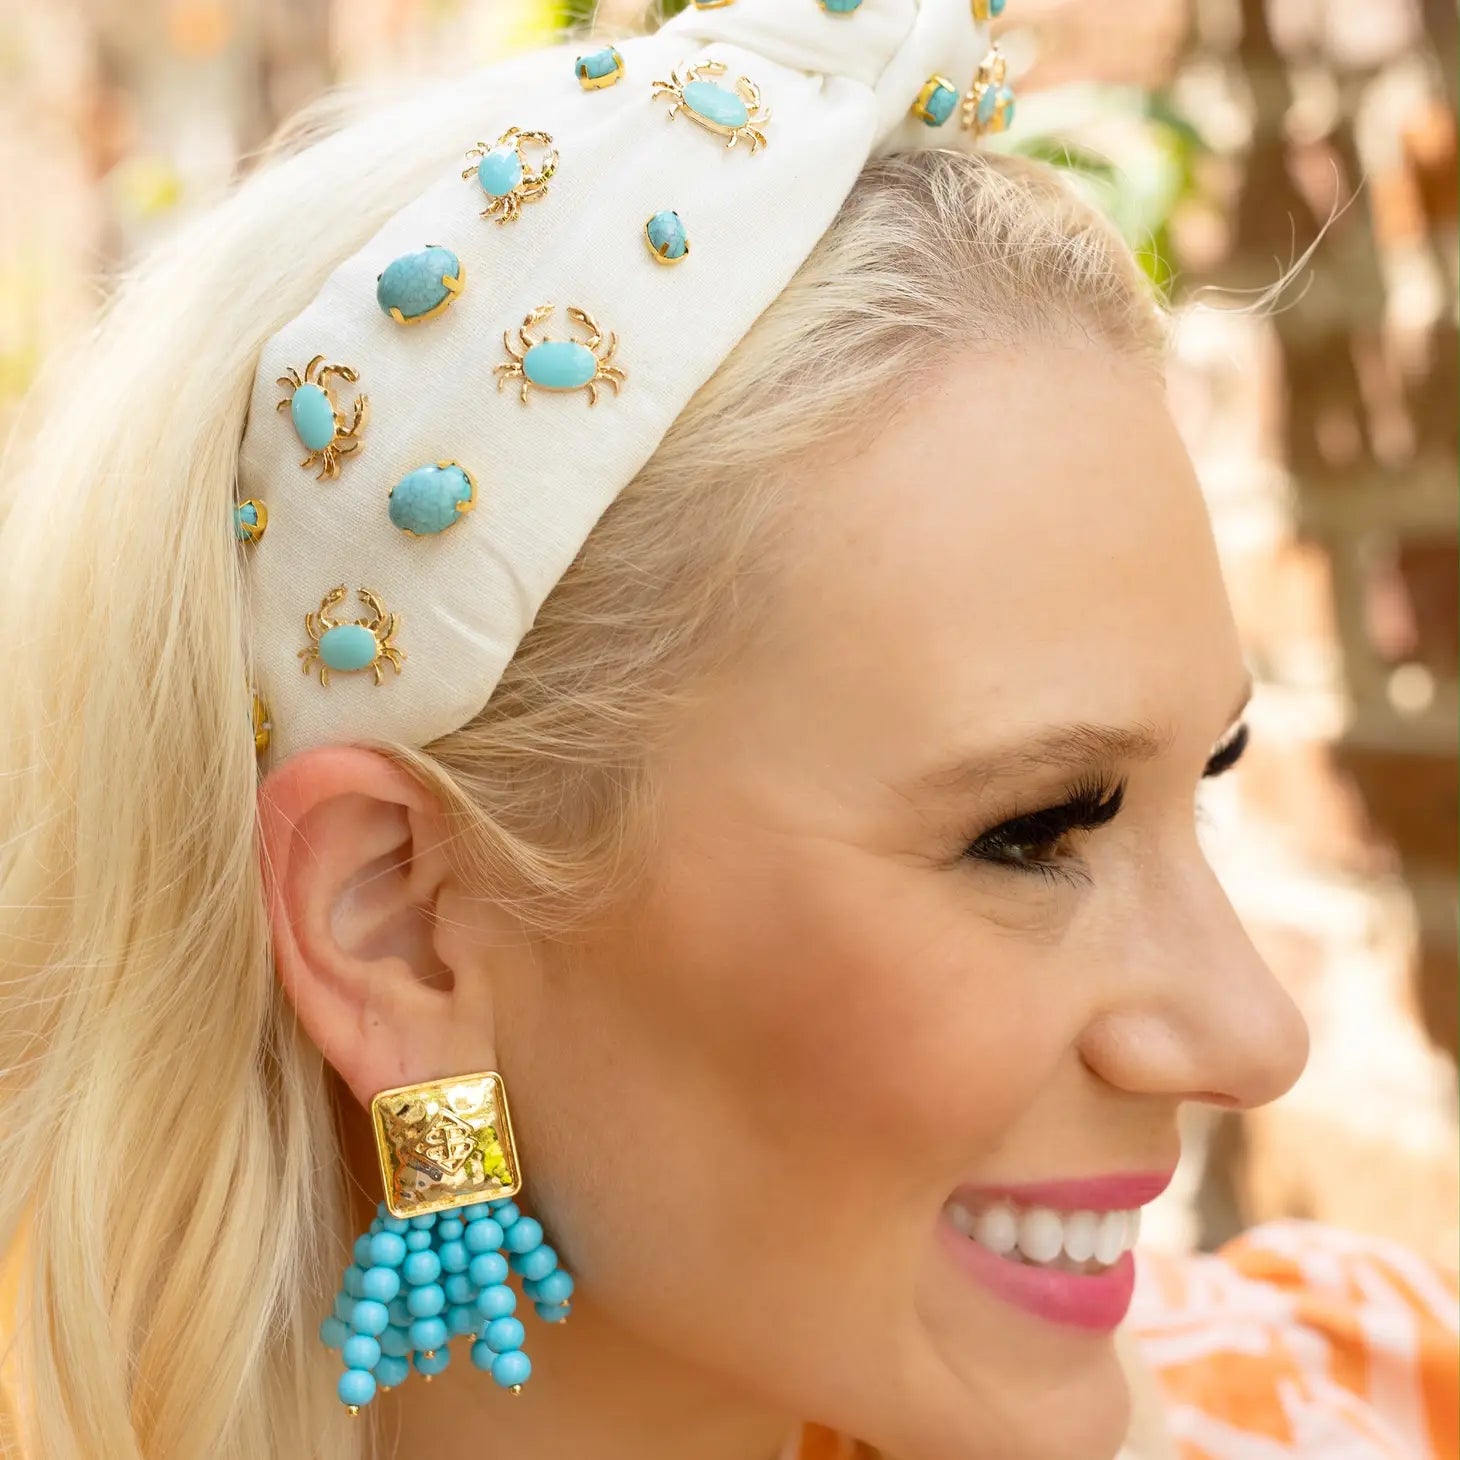 White Twill Headband with Turquoise and Gold Crabs by Brianna Cannon